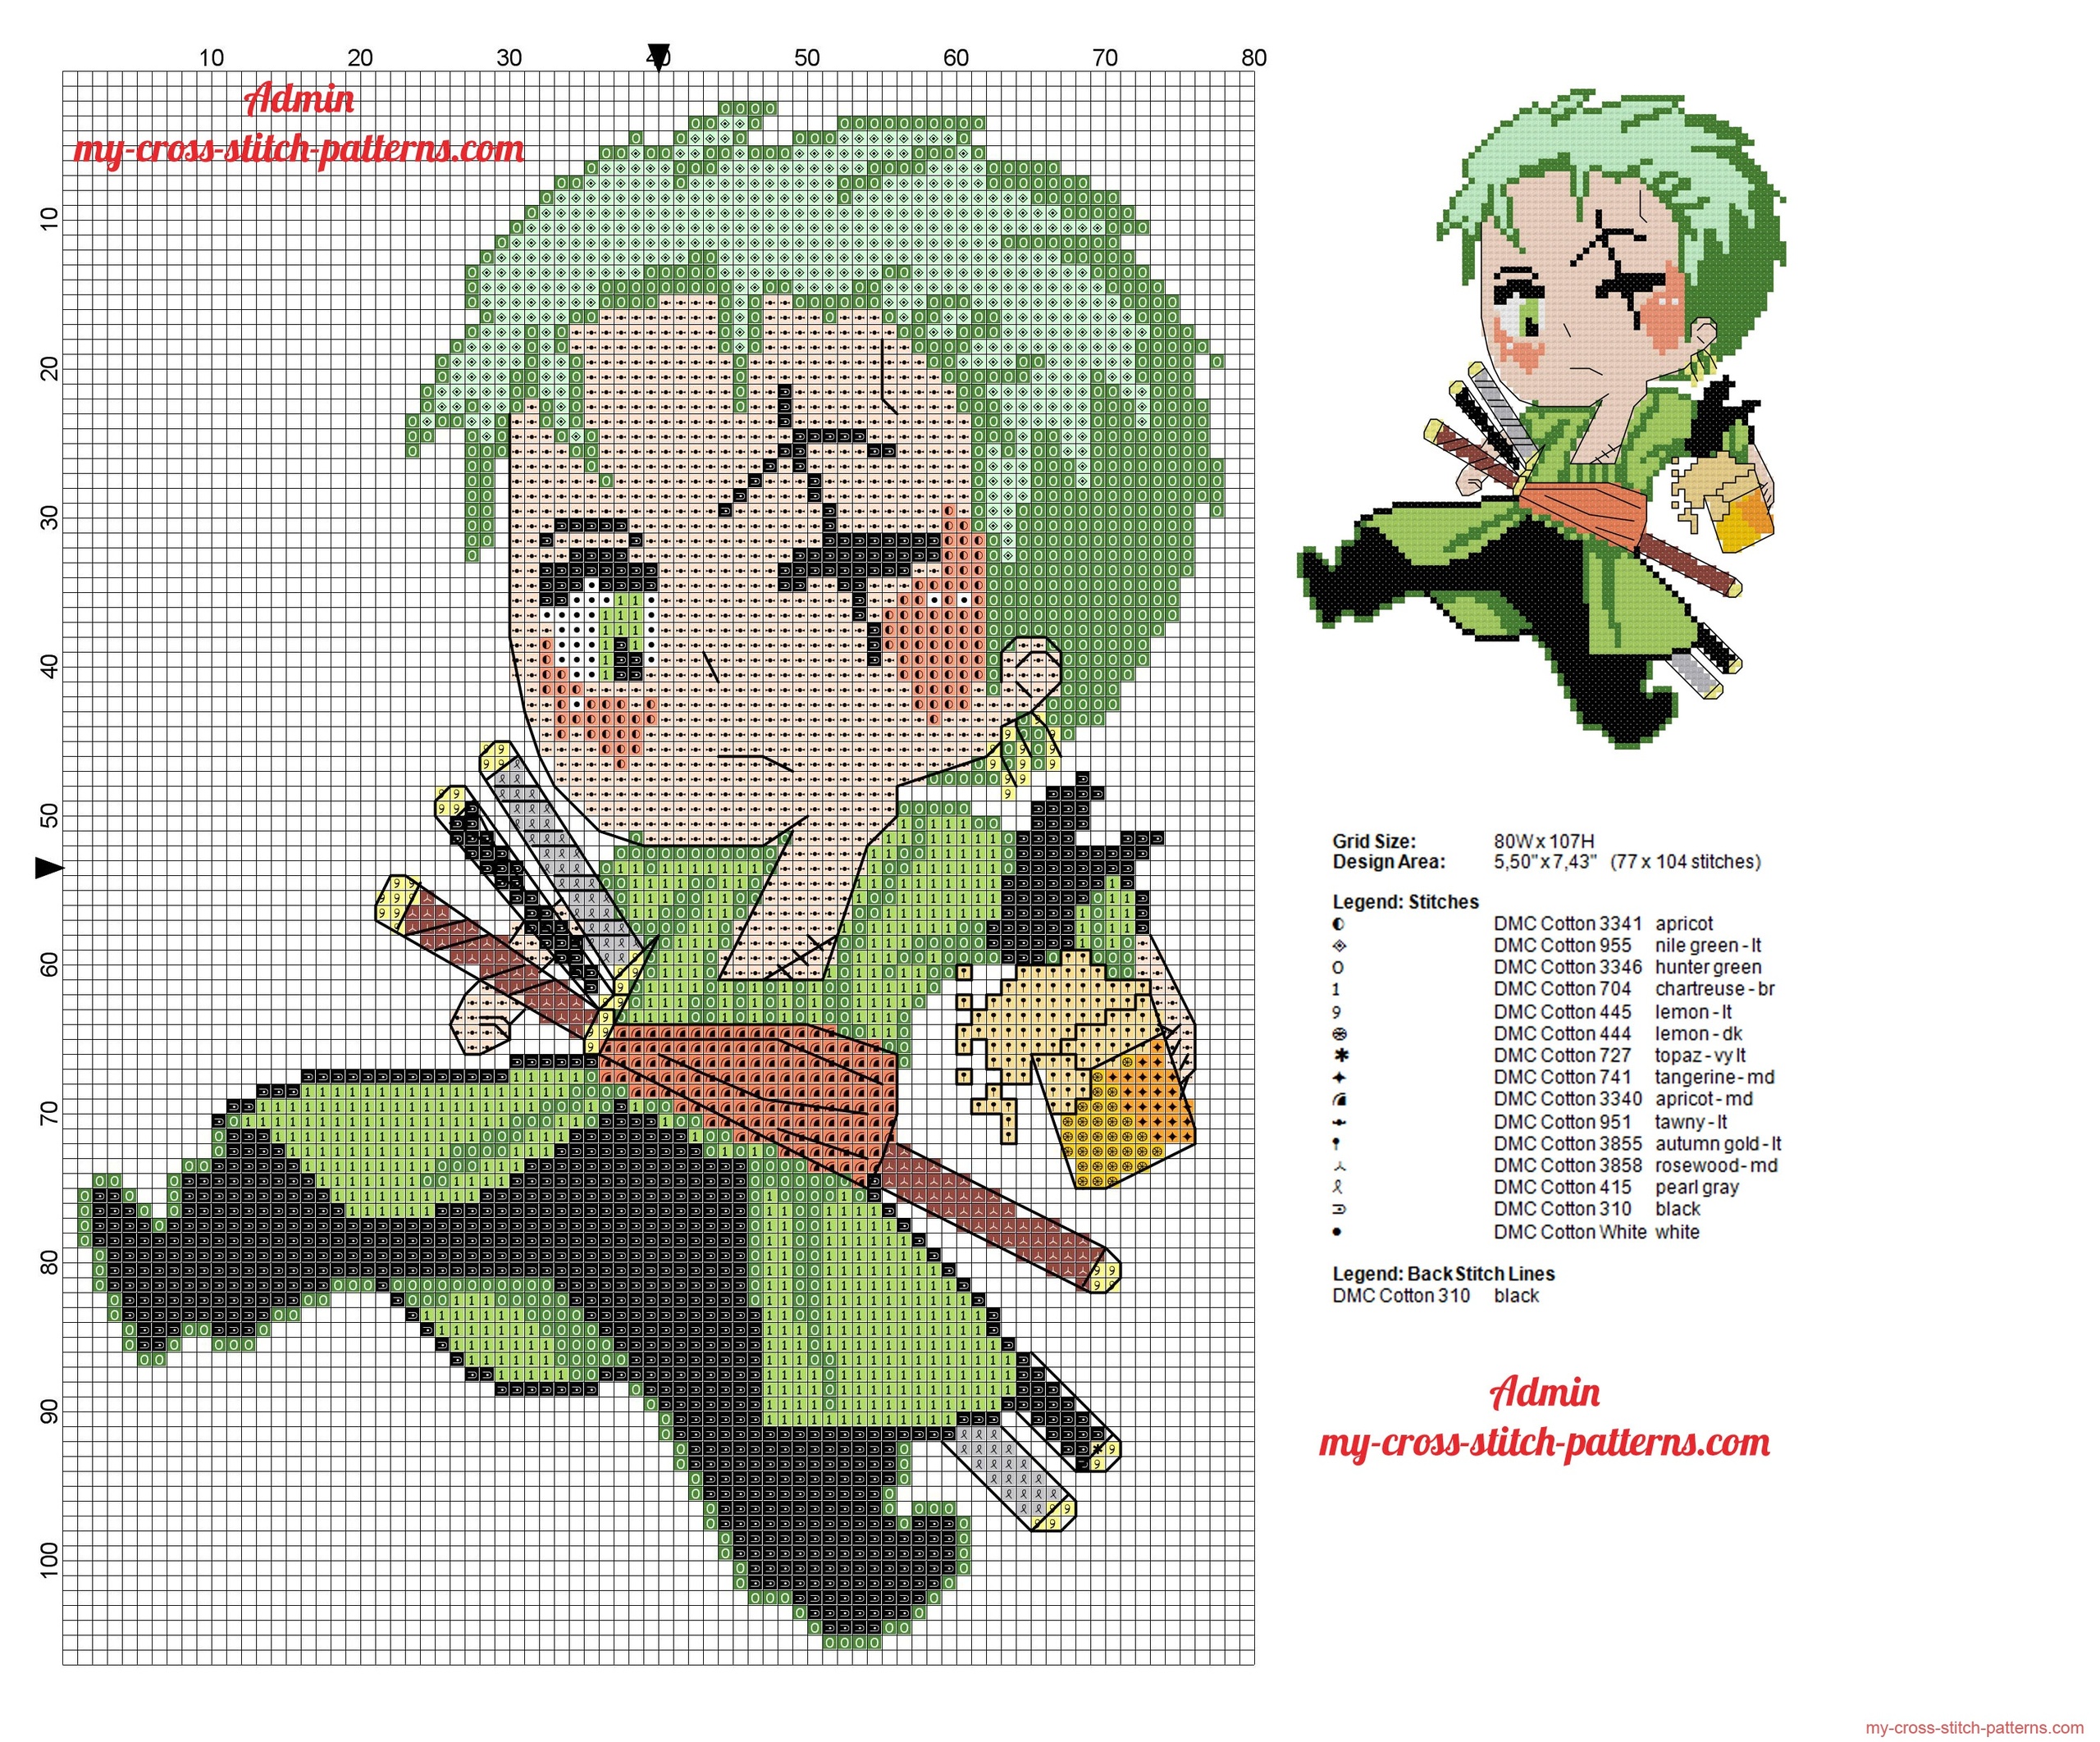 roronoa_zoro_with_a_beer_one_piece_character_cross_stitch_pattern